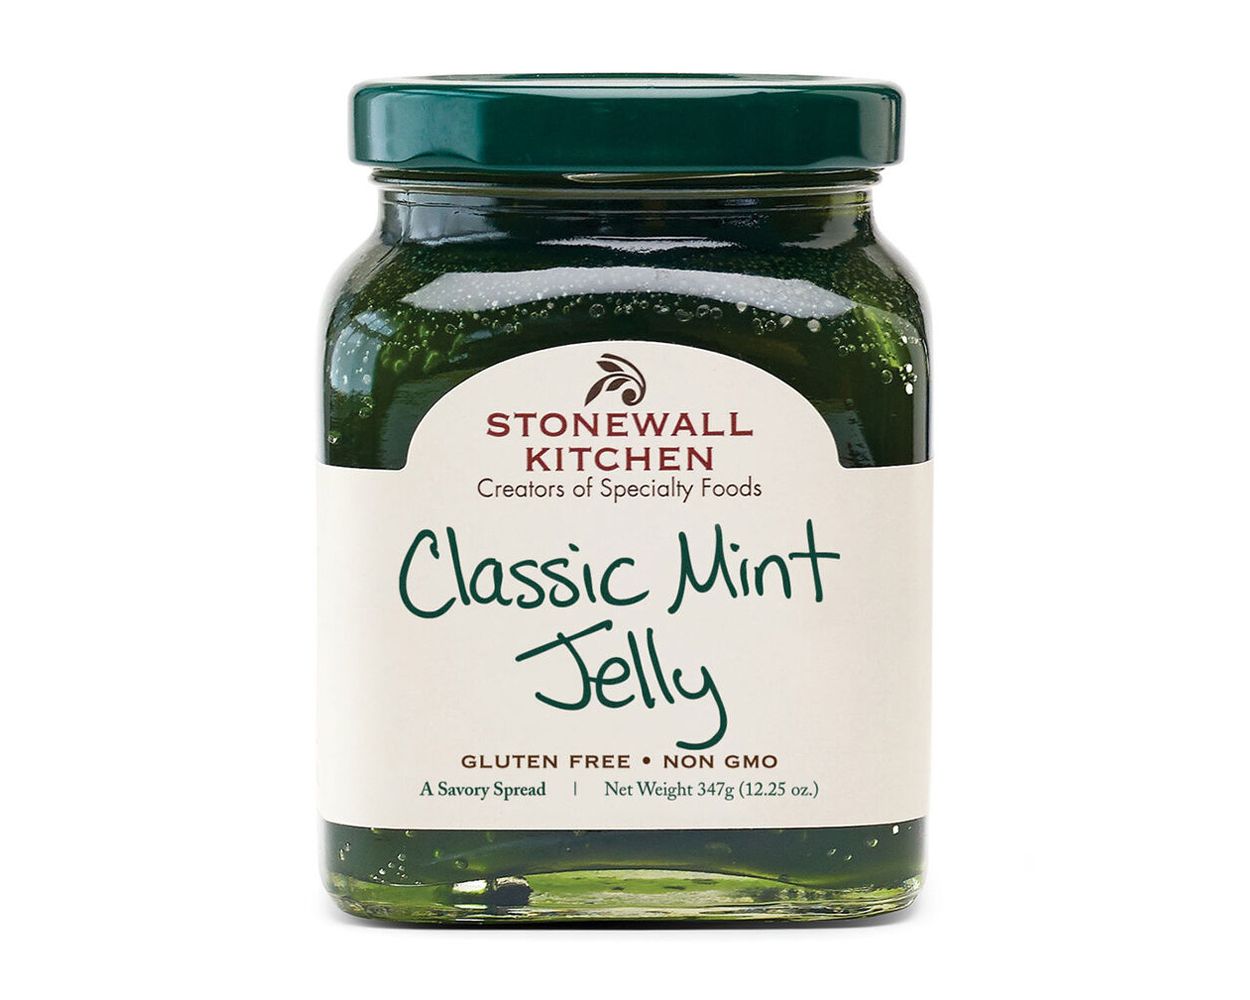 SKU #13749: Classic Mint Jelly from Stonewall Kitchen | American Heritage